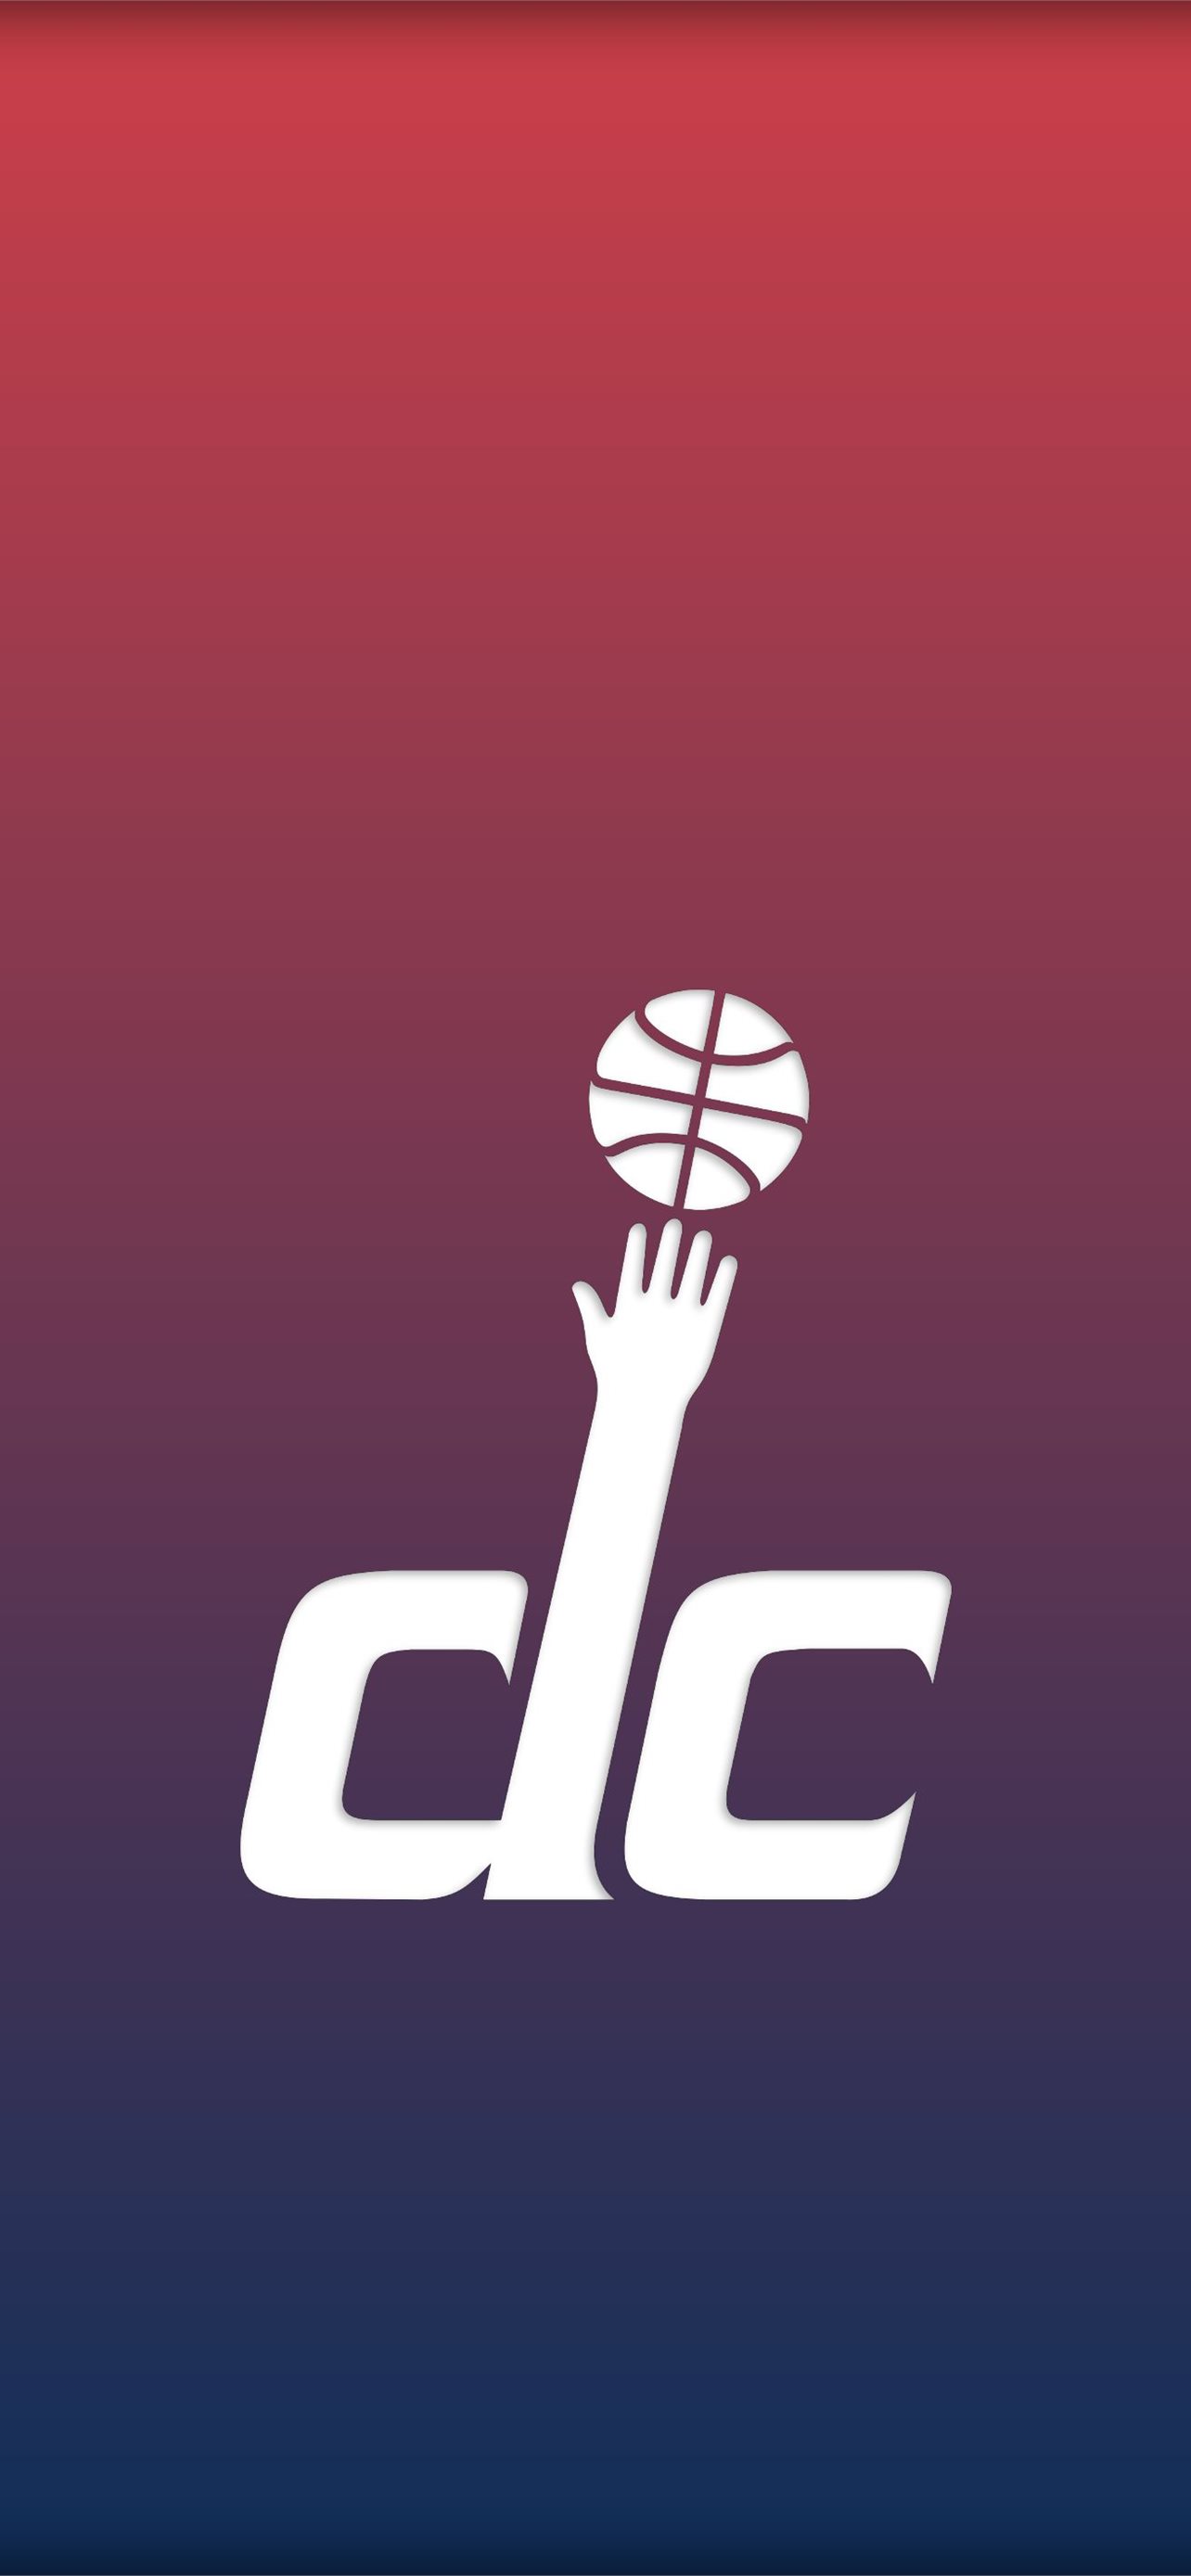 Download wallpapers Washington Wizards basketball club NBA emblem logo  USA National Basketball Association silk flag basketball Washington US  basketball league South East Division for desktop with resolution  2560x1600 High Quality HD pictures